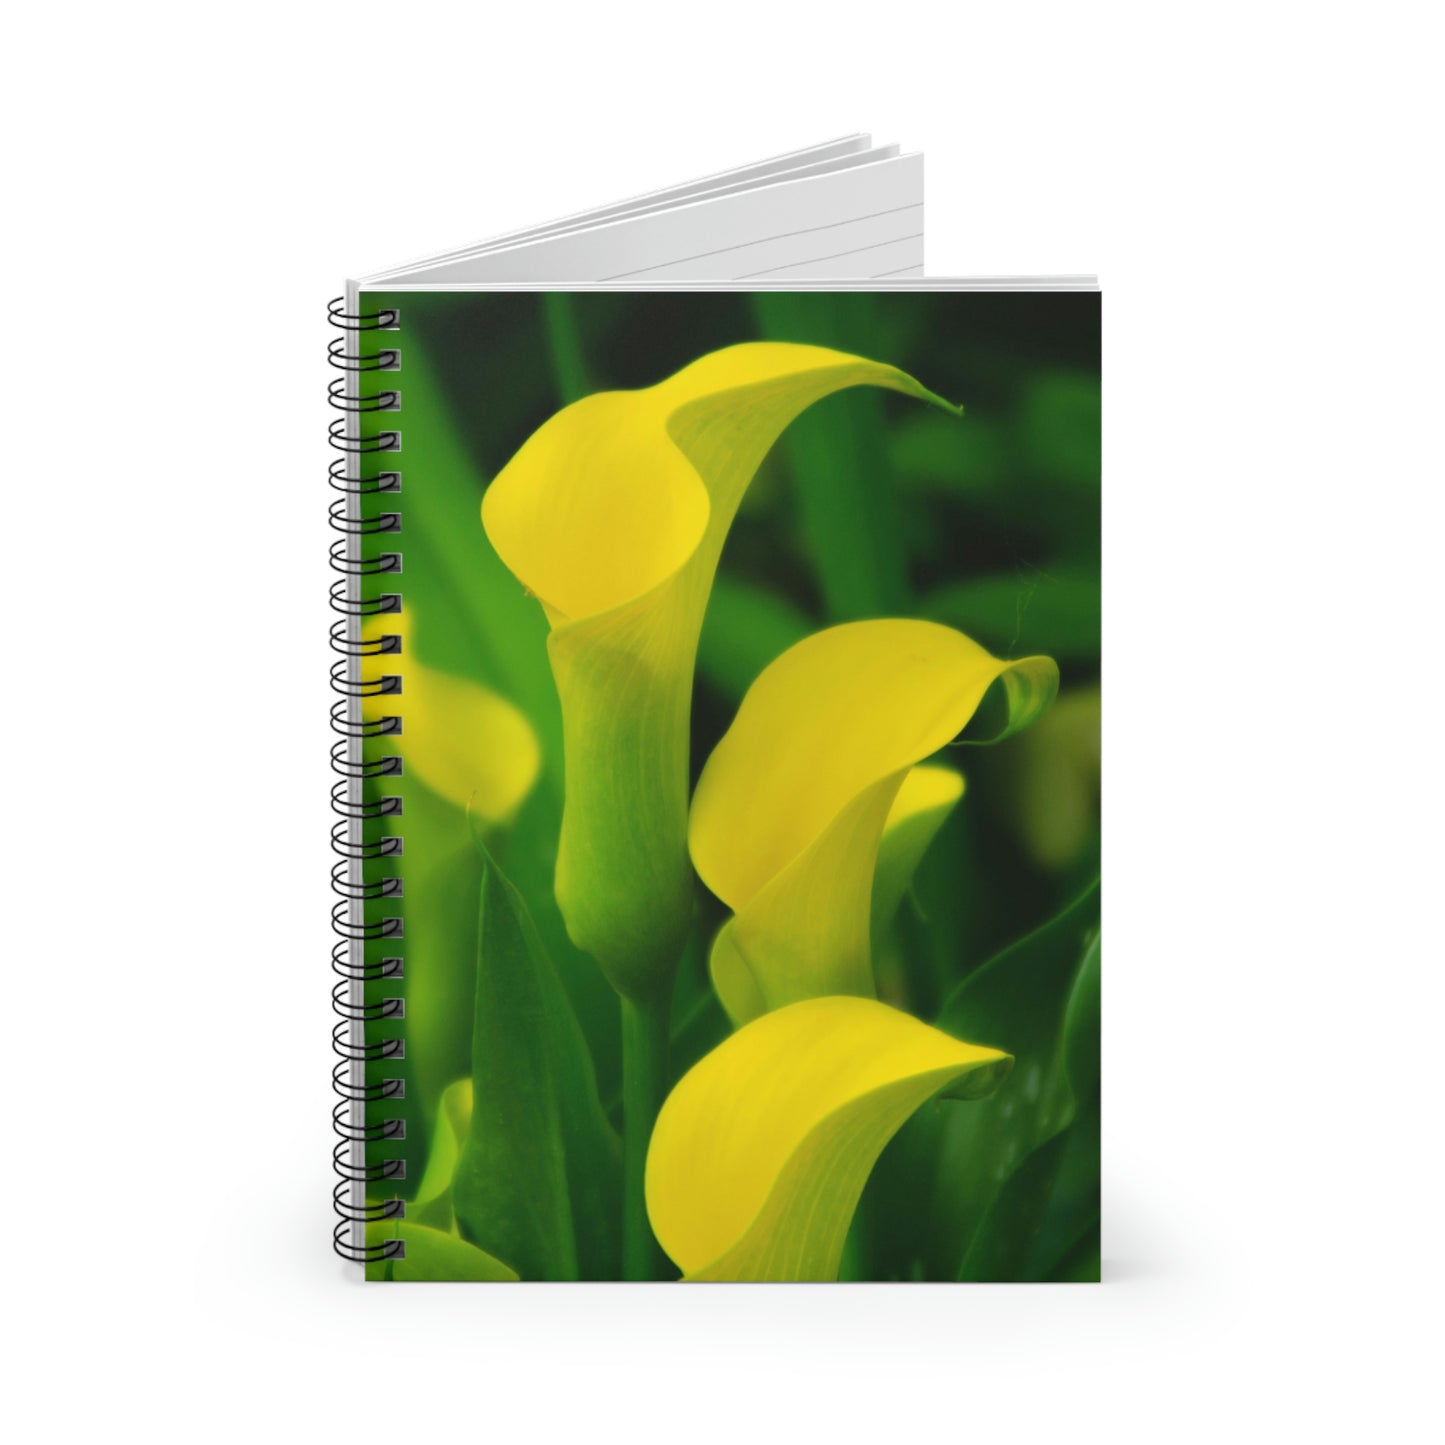 Flowers 33 Spiral Notebook - Ruled Line